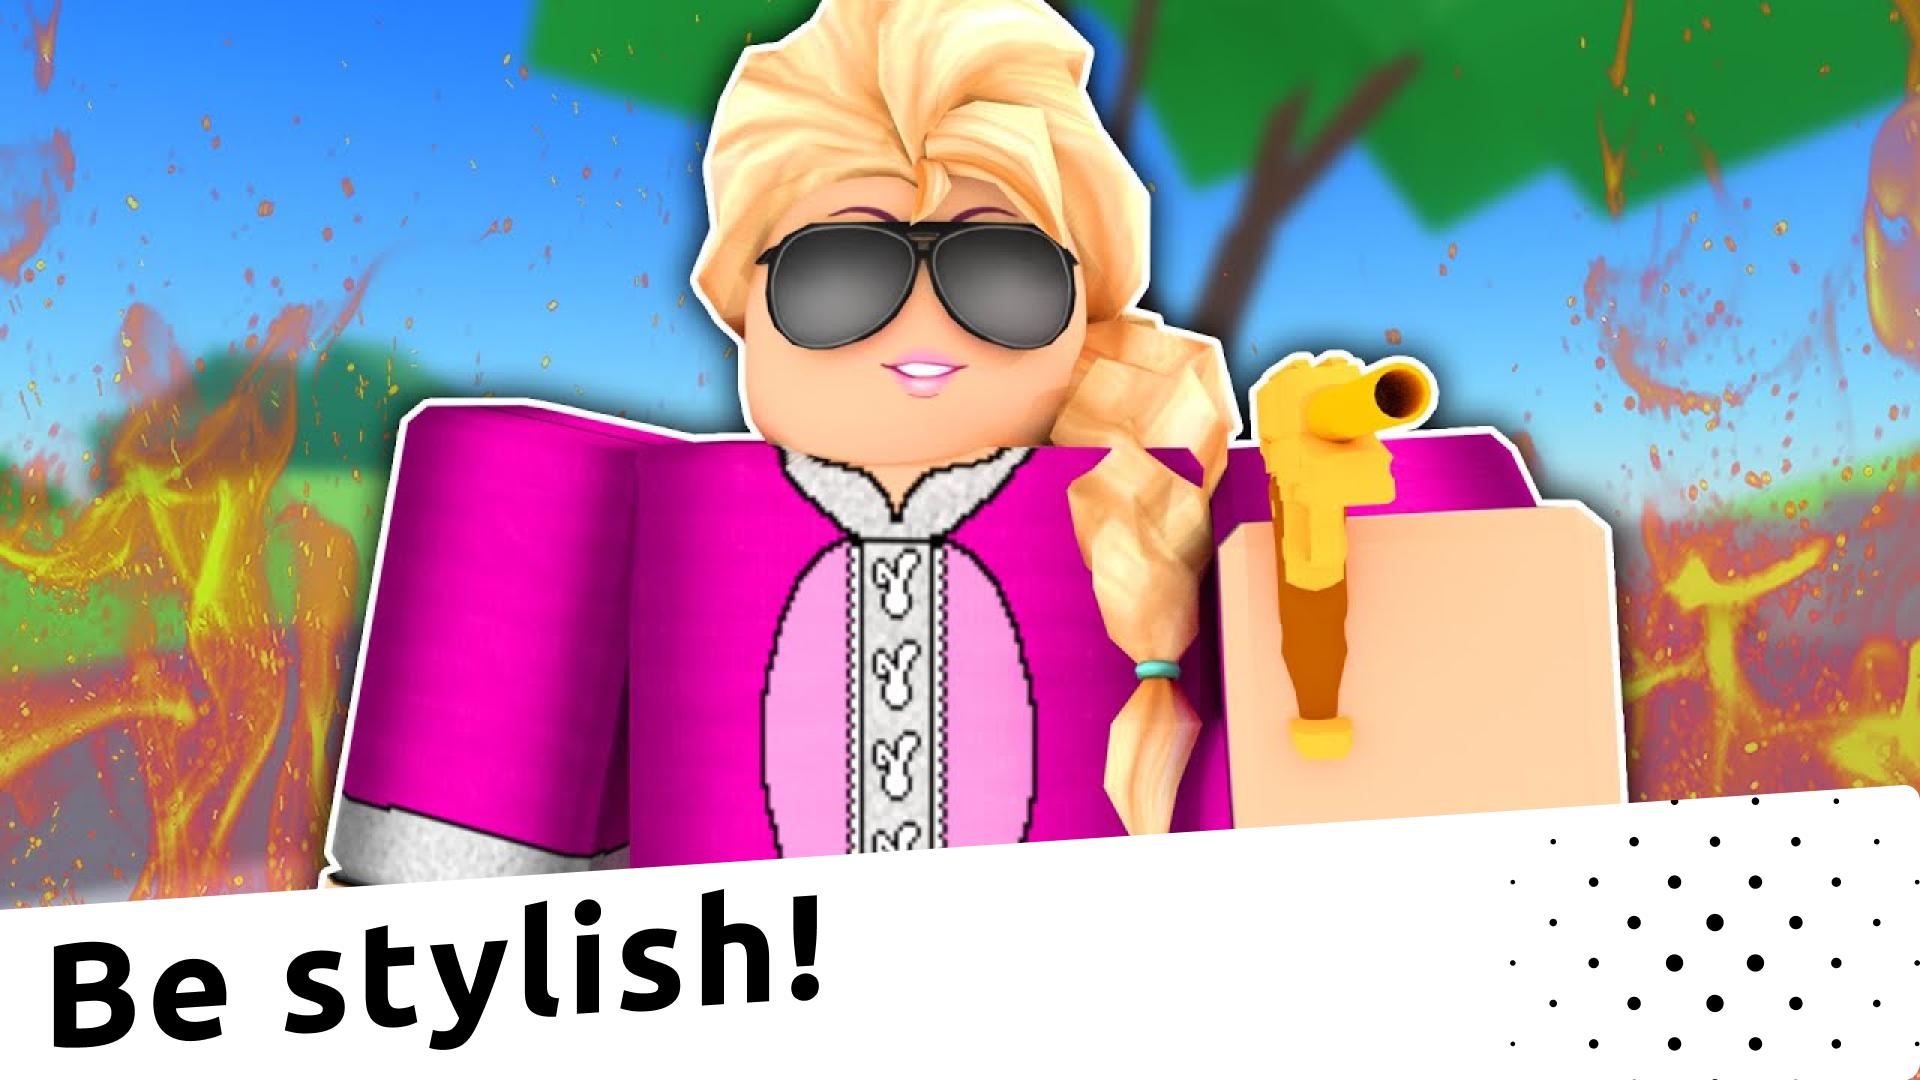 Girl skins for Roblox APK 1.1.4 for Android – Download Girl skins